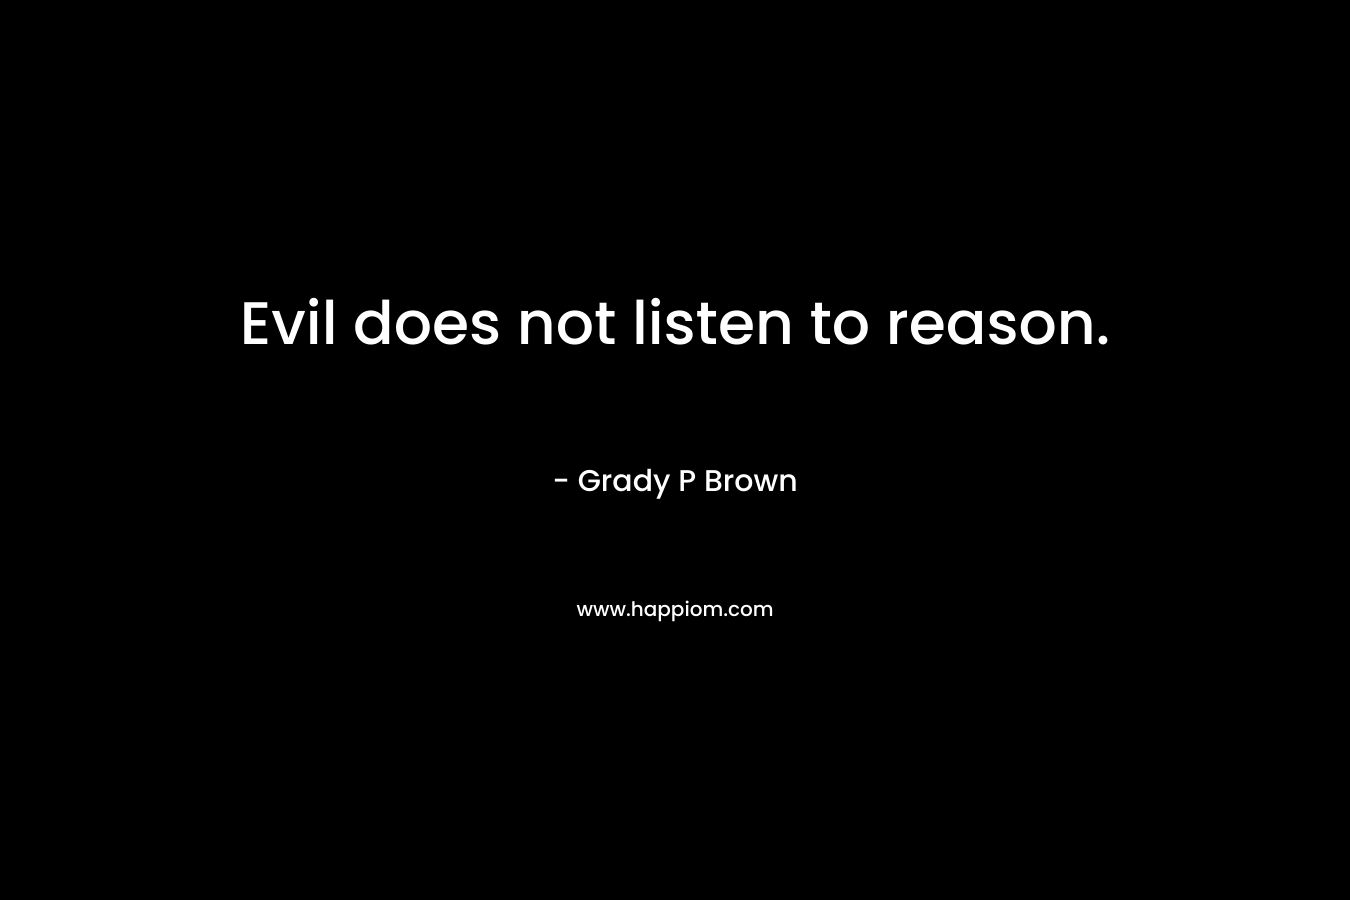 Evil does not listen to reason.